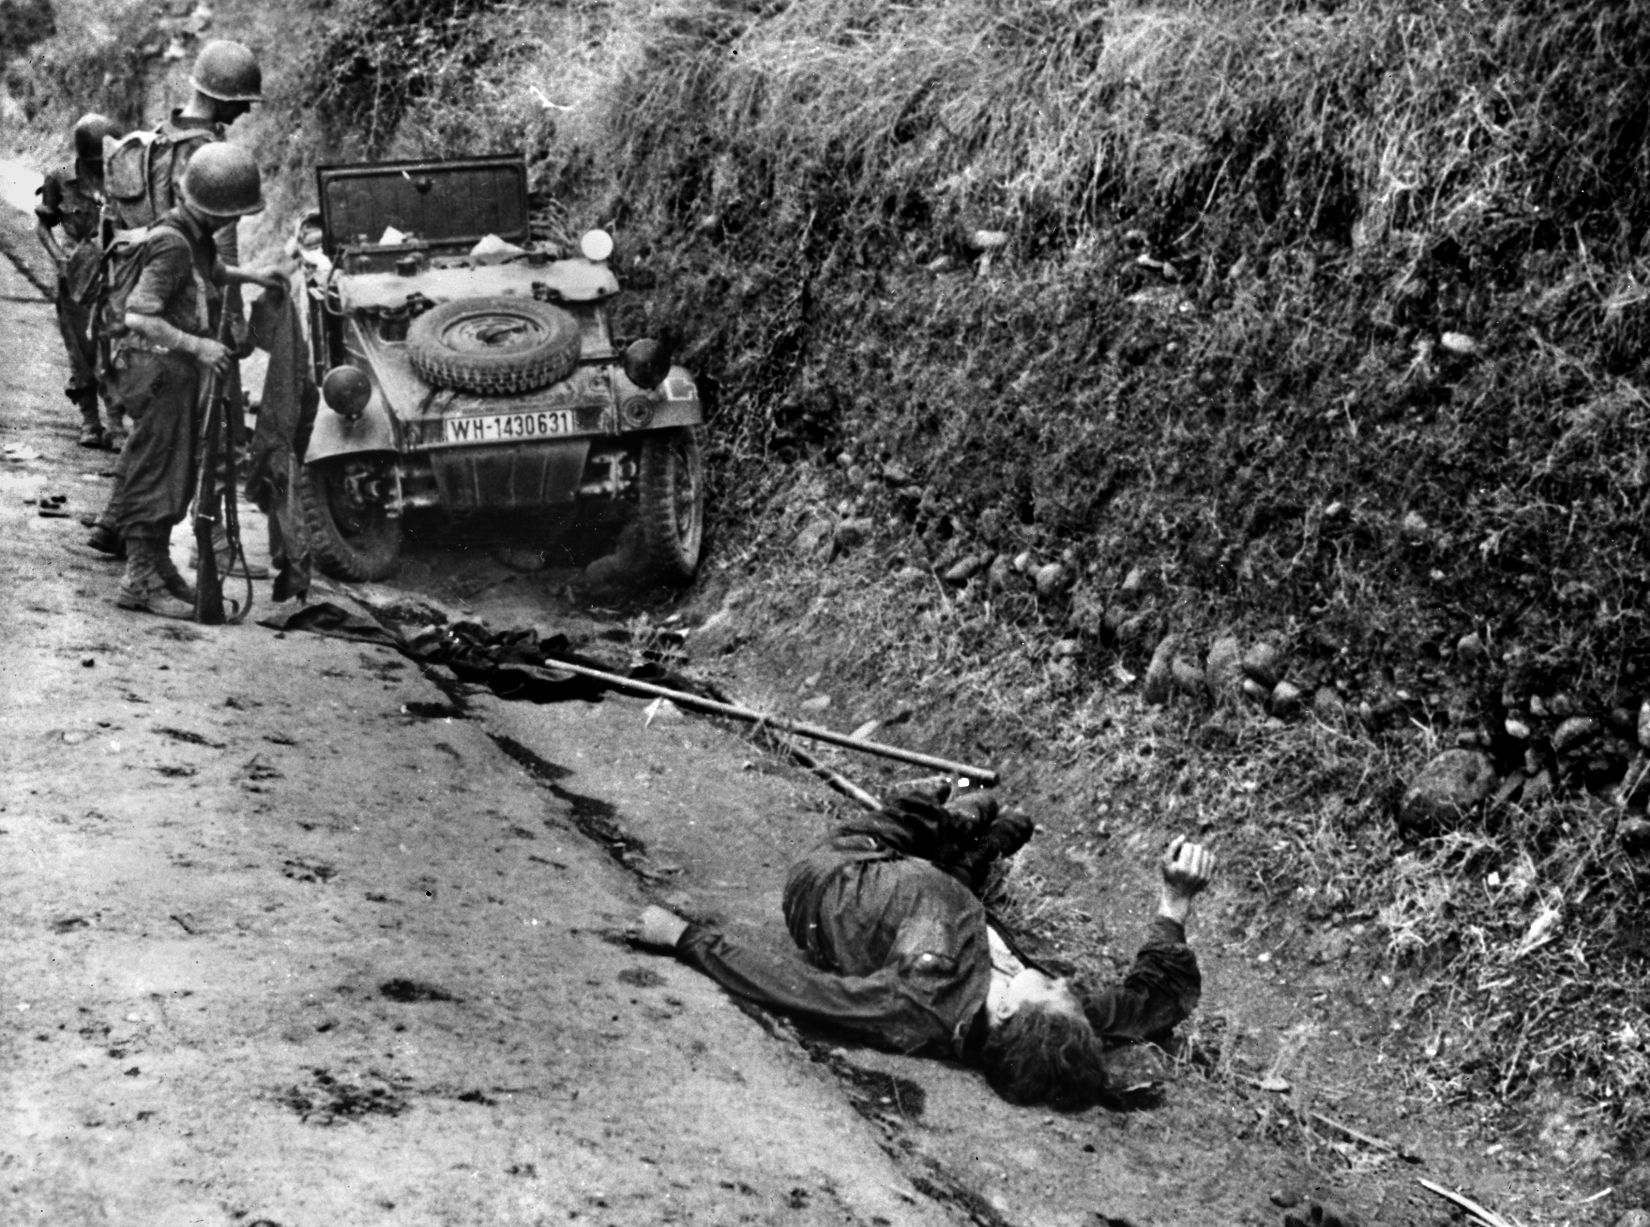 Two American soldiers inspect the wreckage of a German car as its former occupant lies dead in the road a few feet away. The fighting on Sicily was brutal, but thousands of Axis troops managed to escape to the Italian mainland.